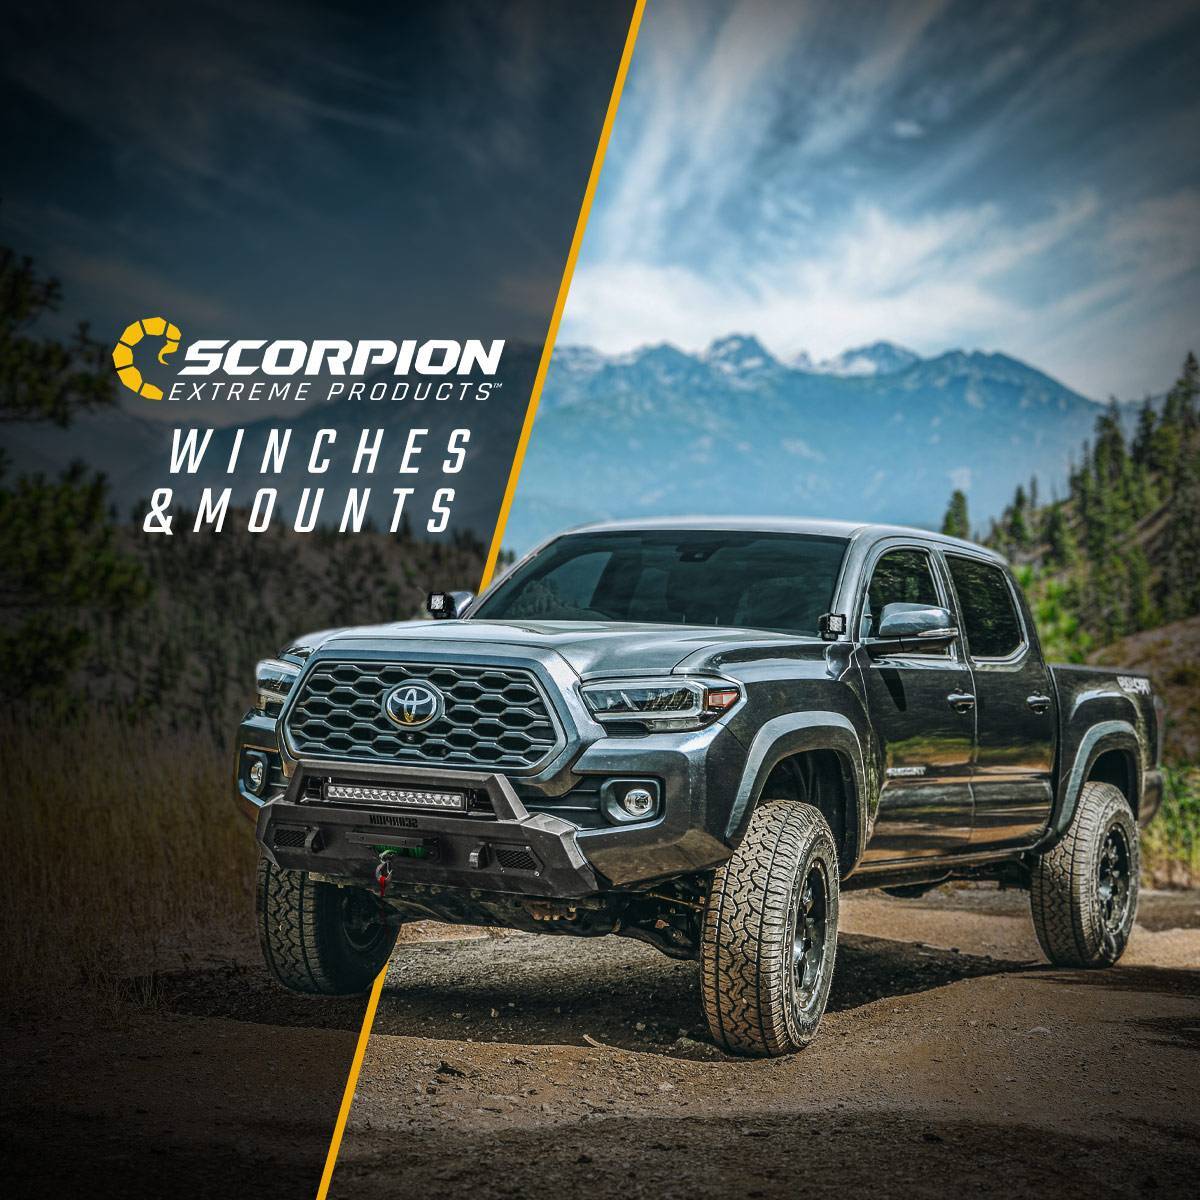 Scorpion Extreme Winches & Mounts